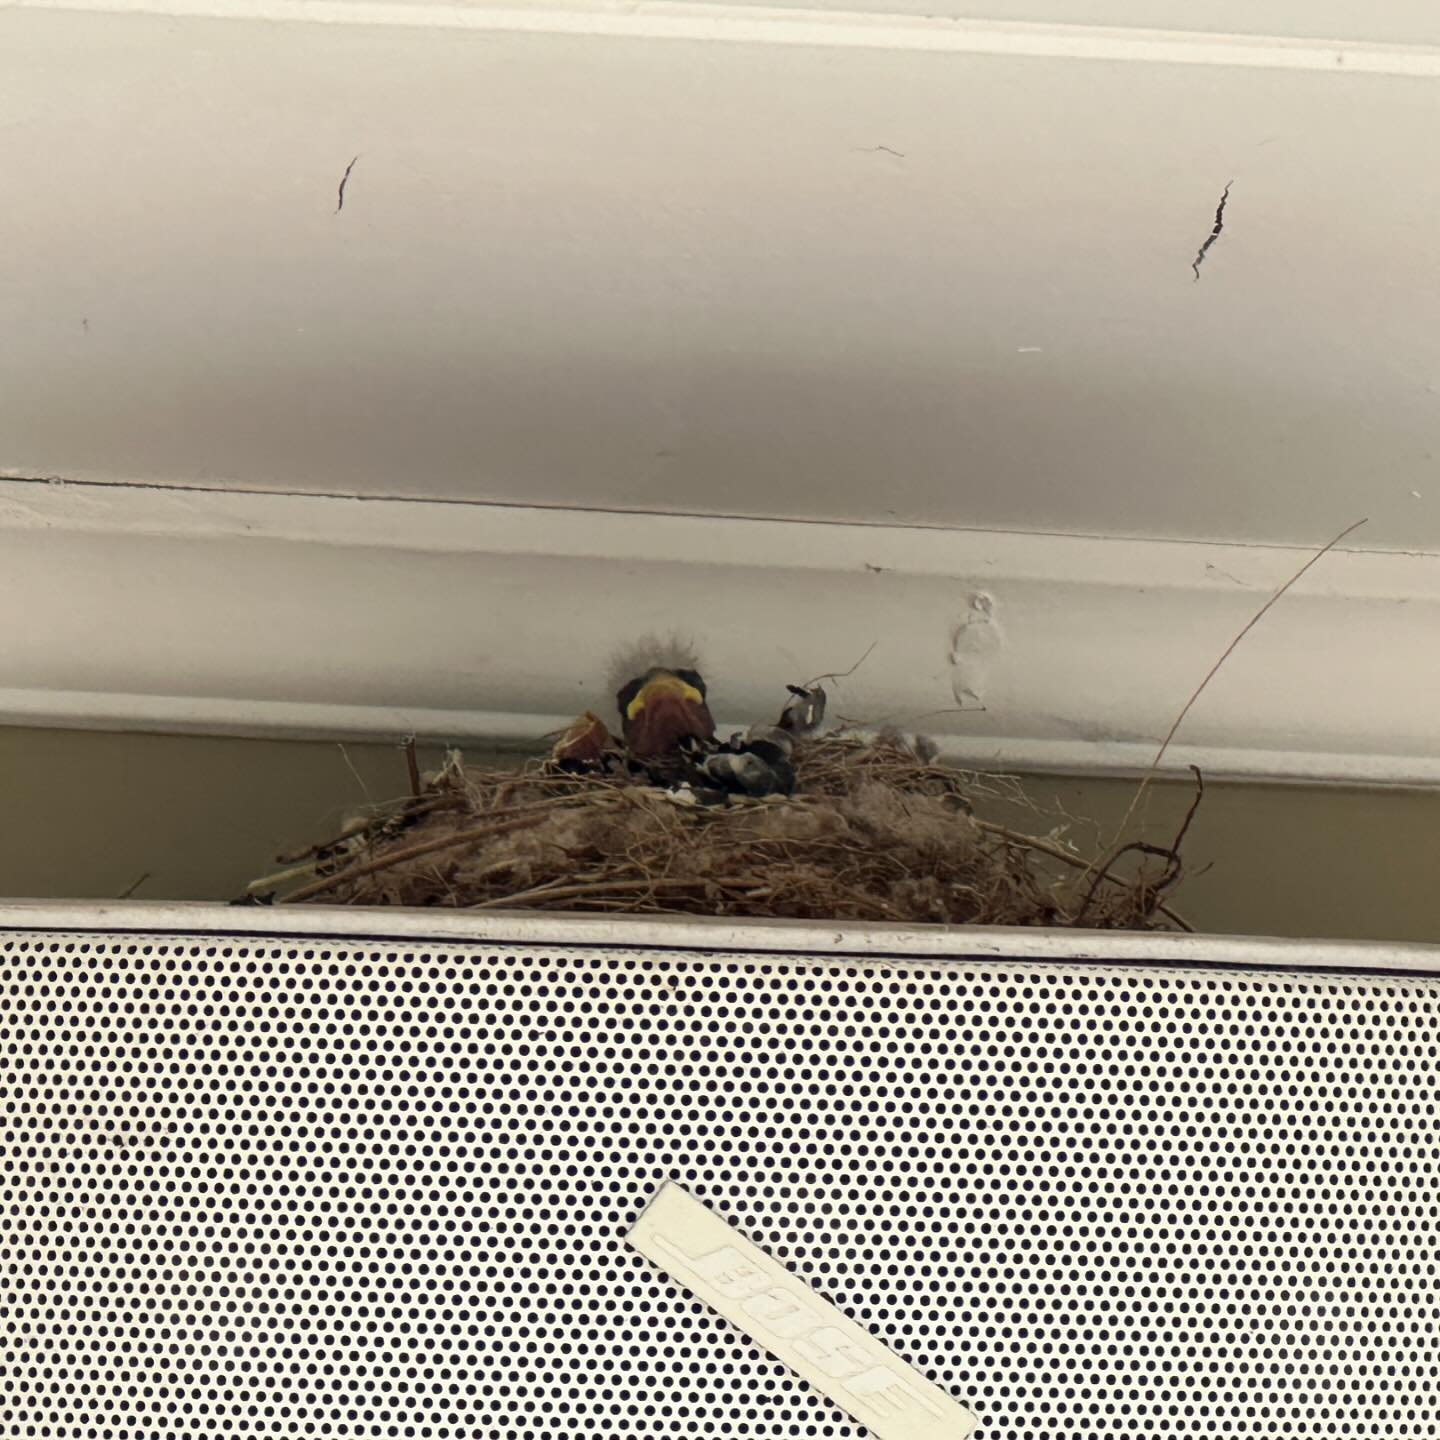 Spring has definitely sprung! Four little baby house finches have hatched in our back yard. Mamma and Pappa Finch are doing a great job loving on these little ones. #birdlife #babybird #spring